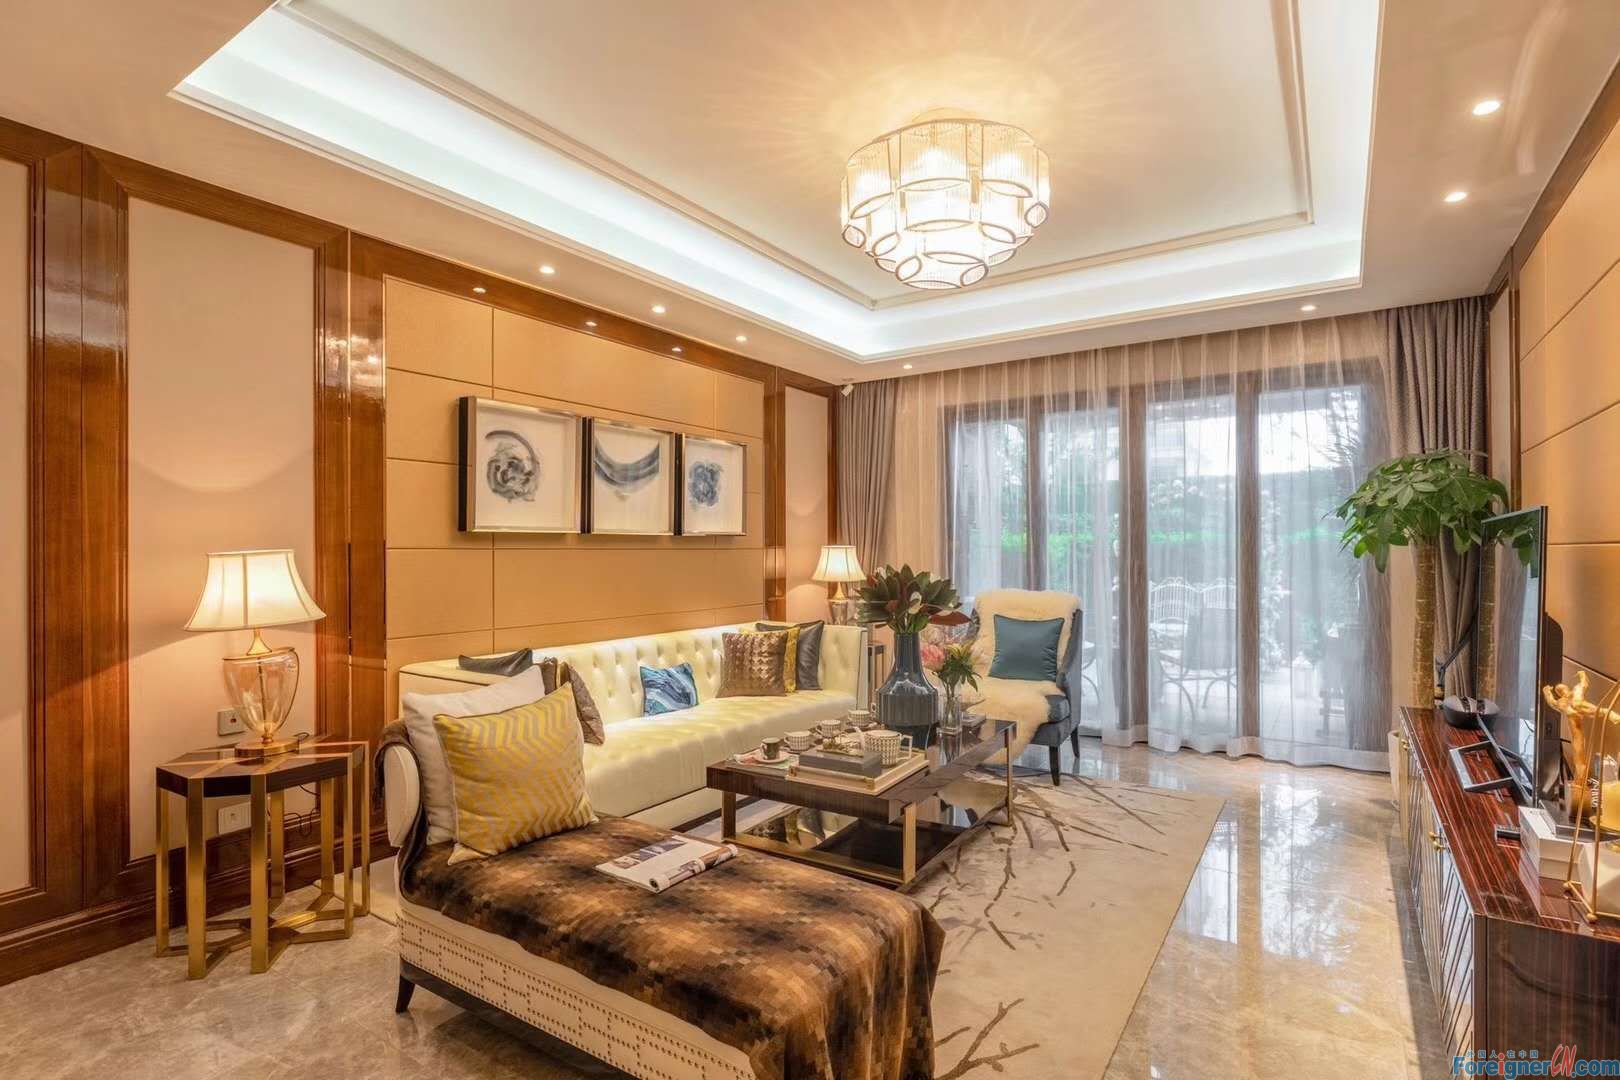 Great !!! Real Estate for Rent recommendation/4 bedrooms and 2 bathrooms/Jinji Lake in SIP/Central AC 